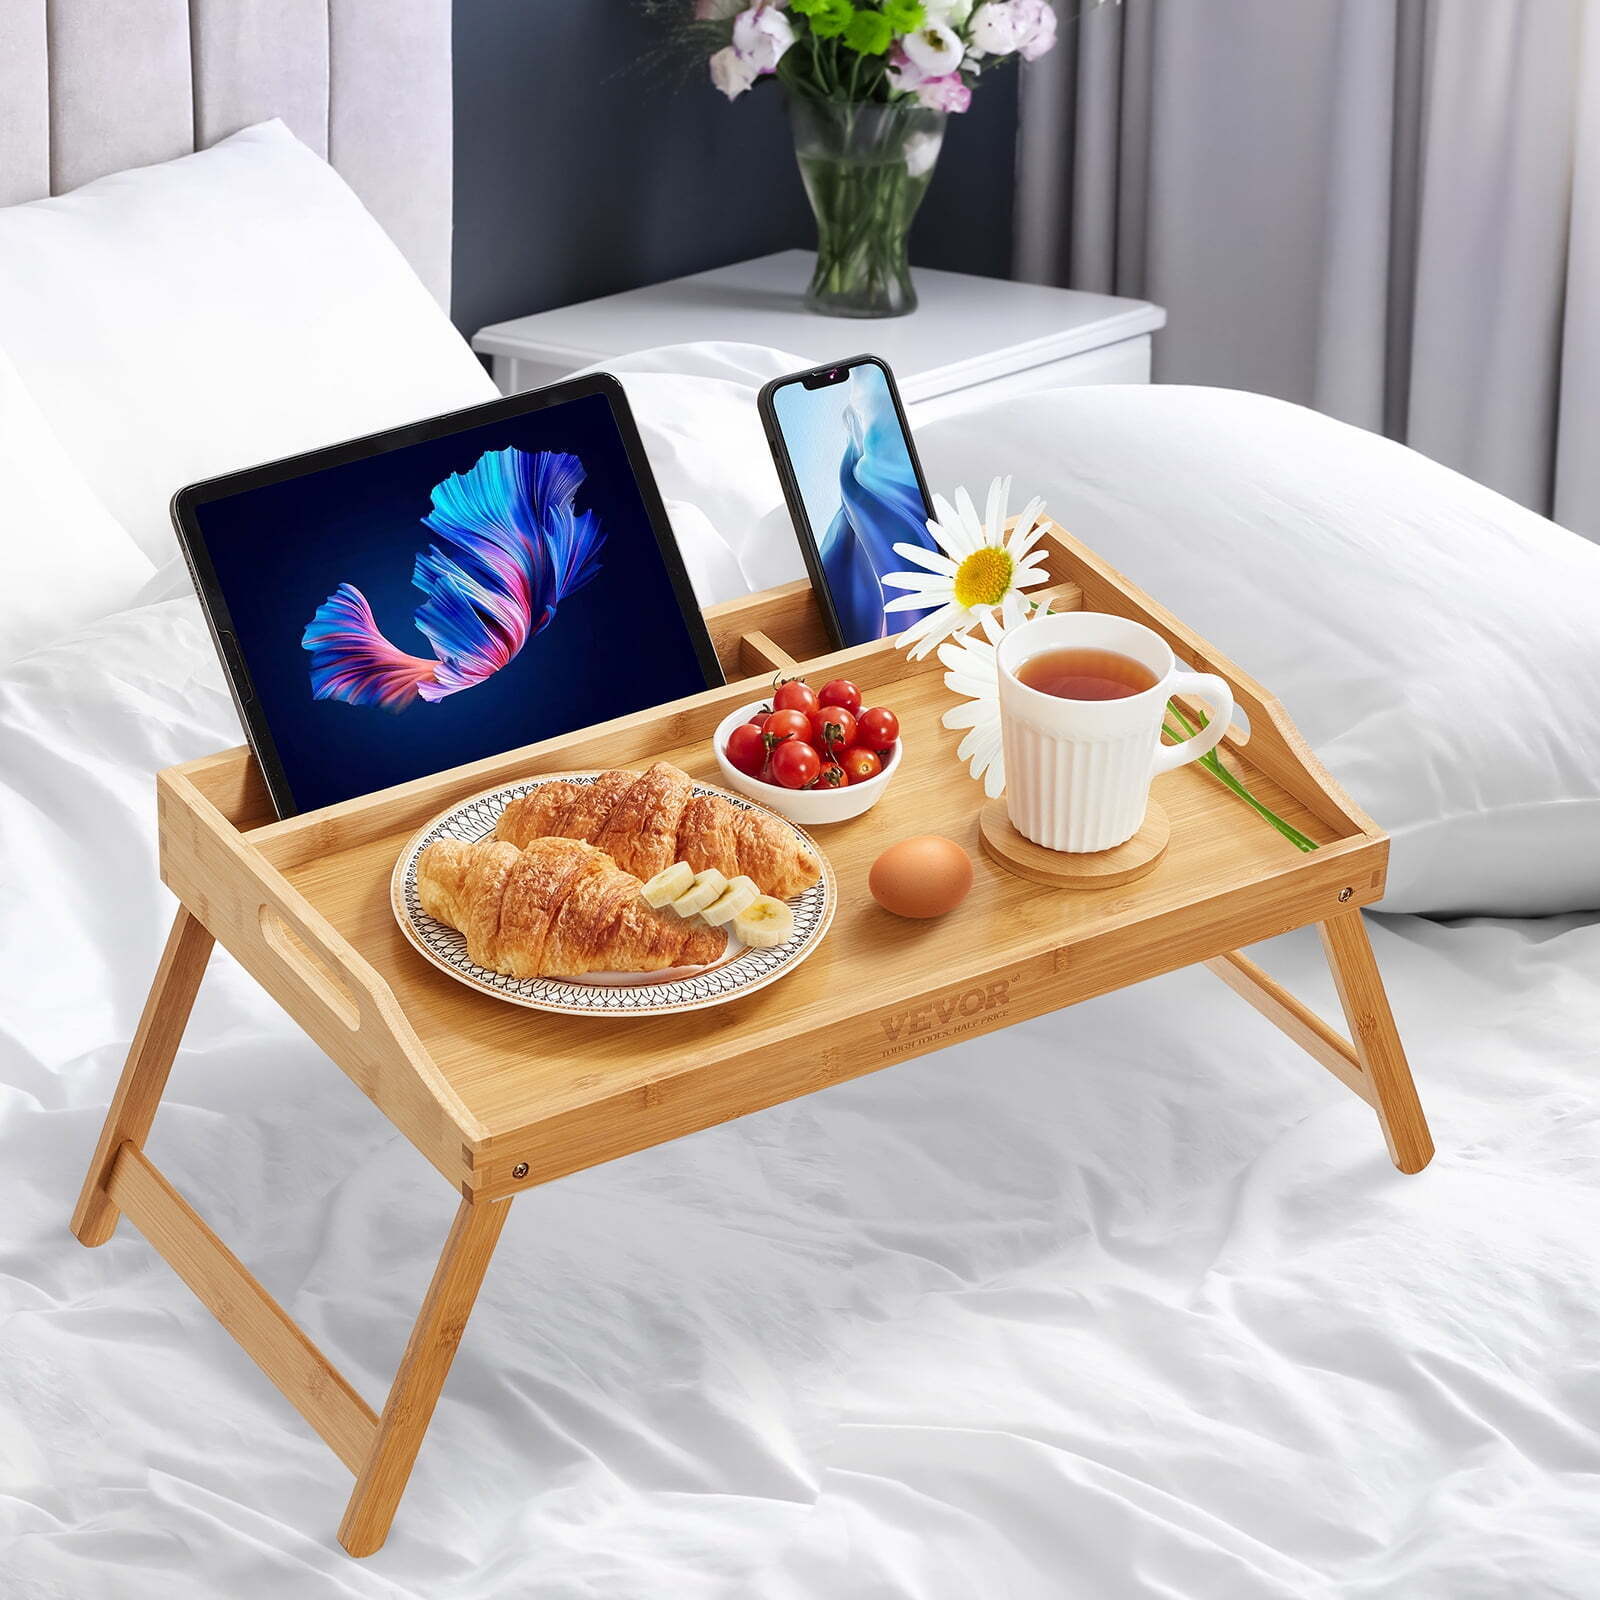 BENTISM Bamboo Bed Tray Breakfast Serving Table Laptop Desk with Foldable Legs..